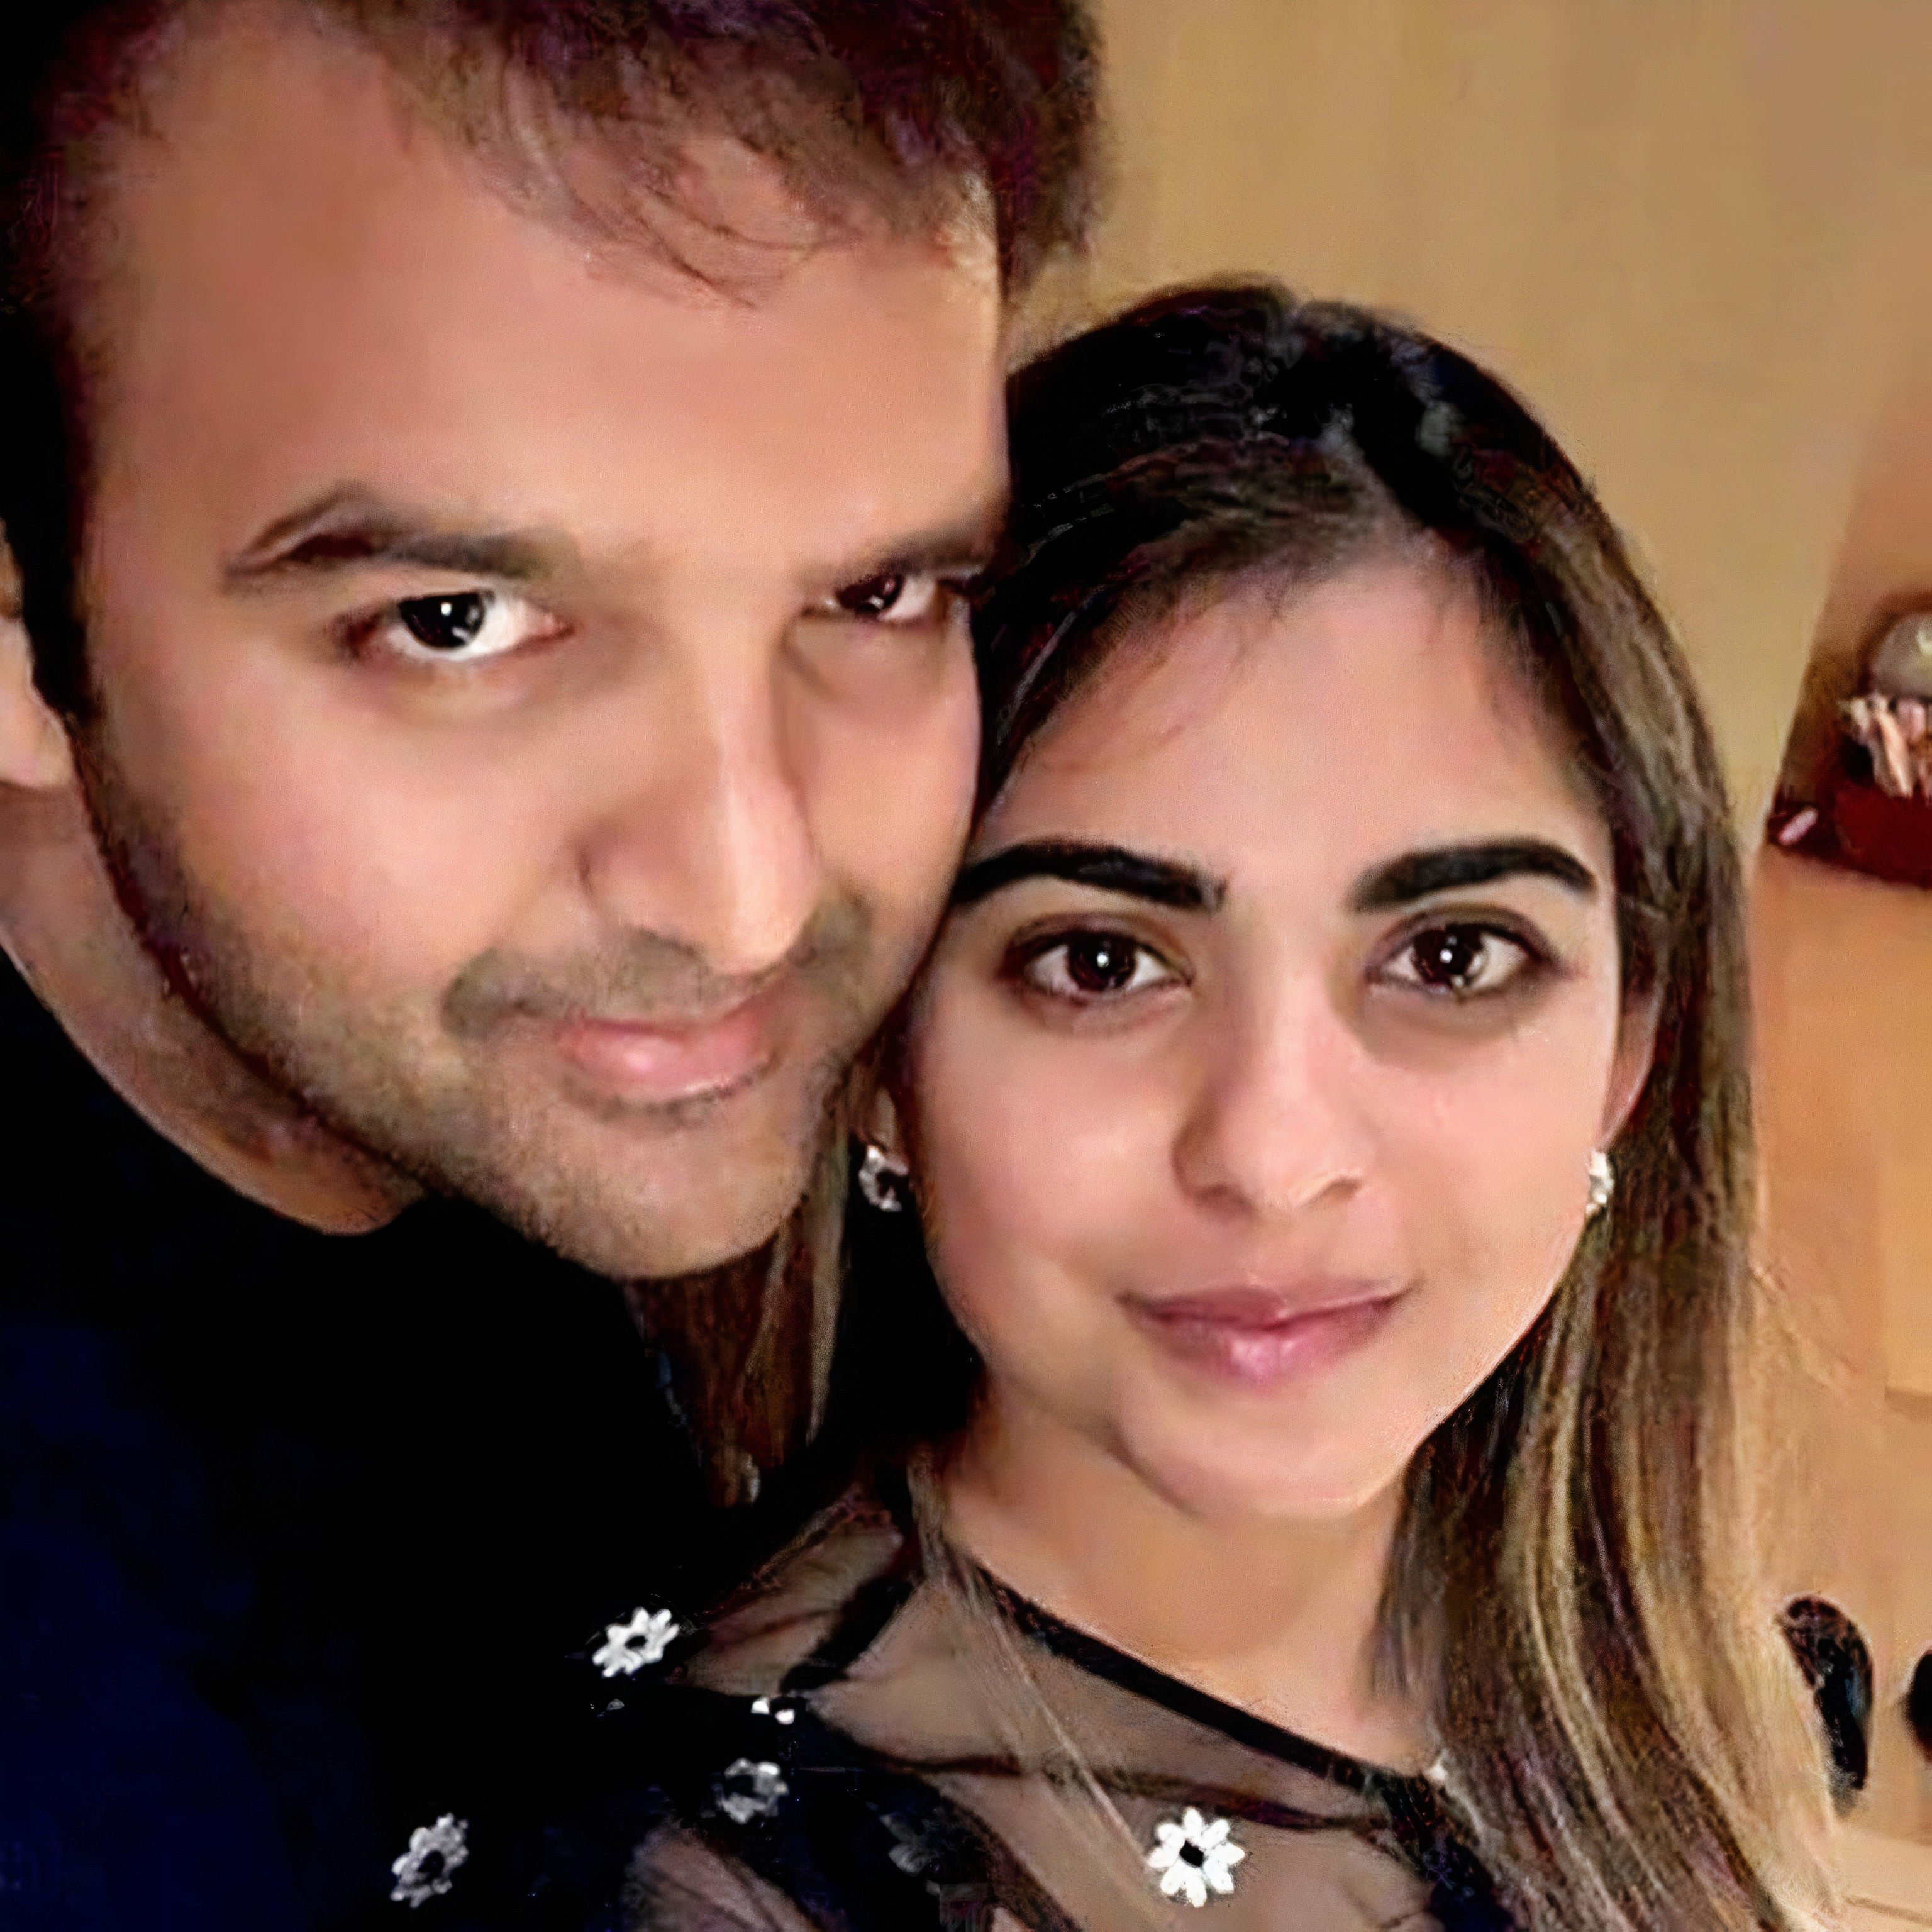 Inside Isha Ambani and Anand Piramal's happy marriage: how billionaire Mukesh Ambani's only daughter keeps the romance alive on the Indian power couple's second wedding anniversary. South China Morning Post